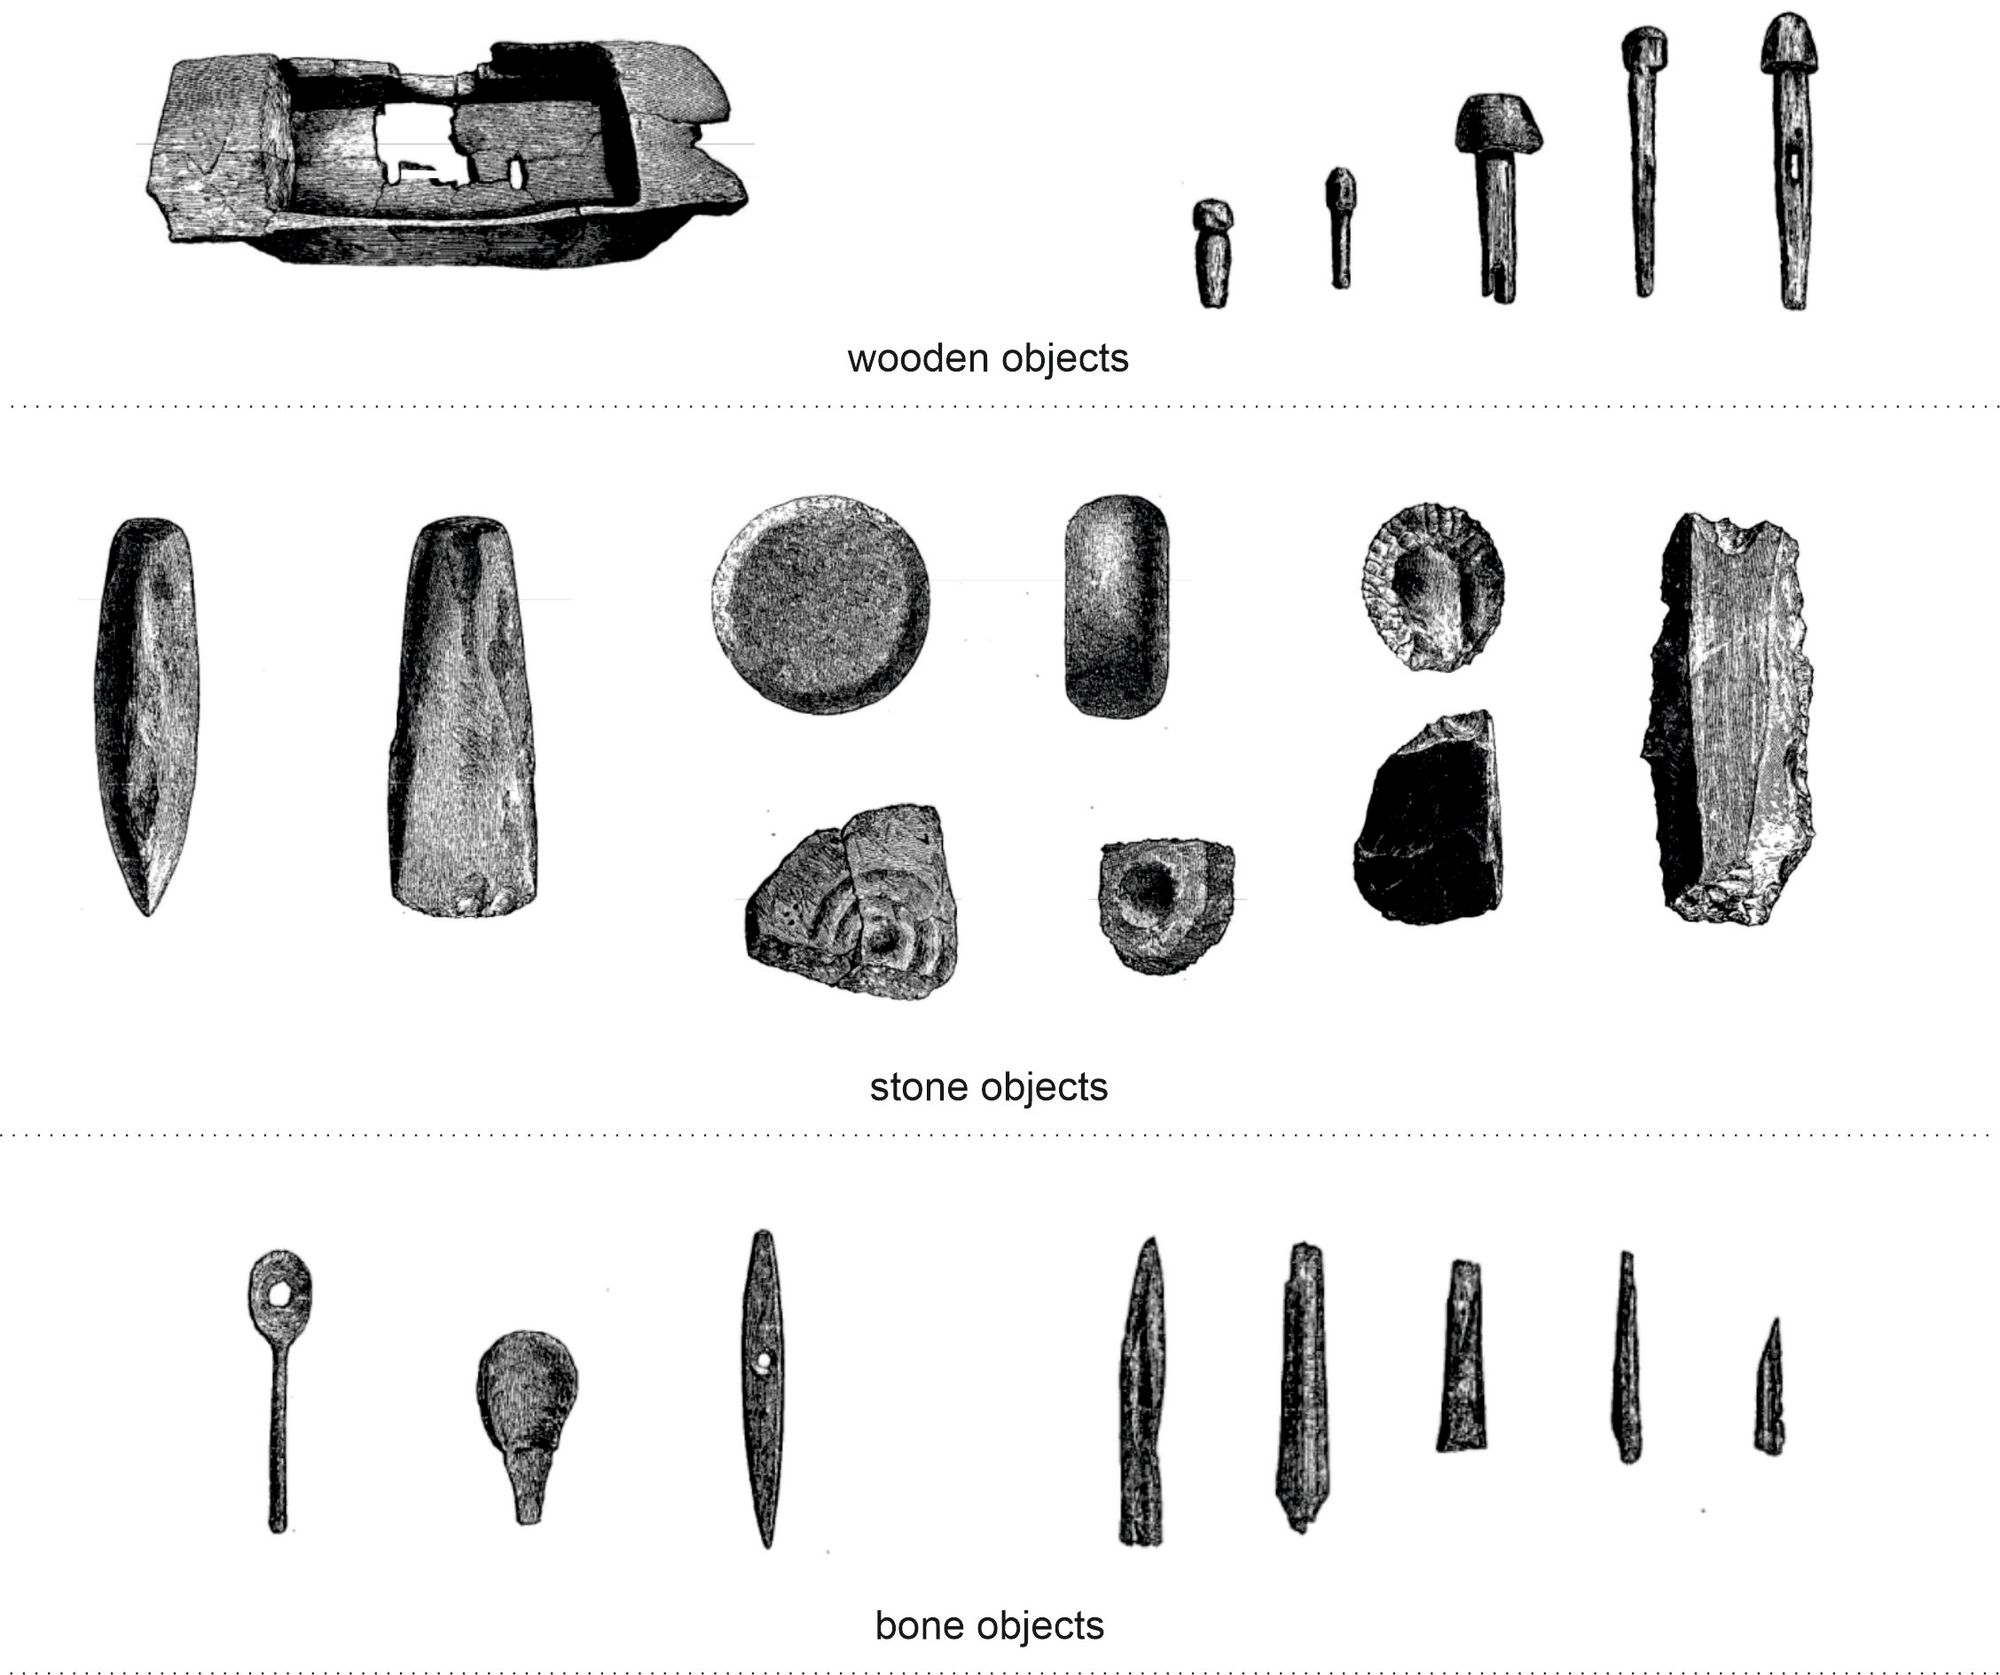 Figure 3. Some of the many objects recovered during the excavation of Lochlee crannog by Dr Robert Munro (1878-79).  Includes wooden nails, stone beads and weapons, as well as bone needles and spoons.